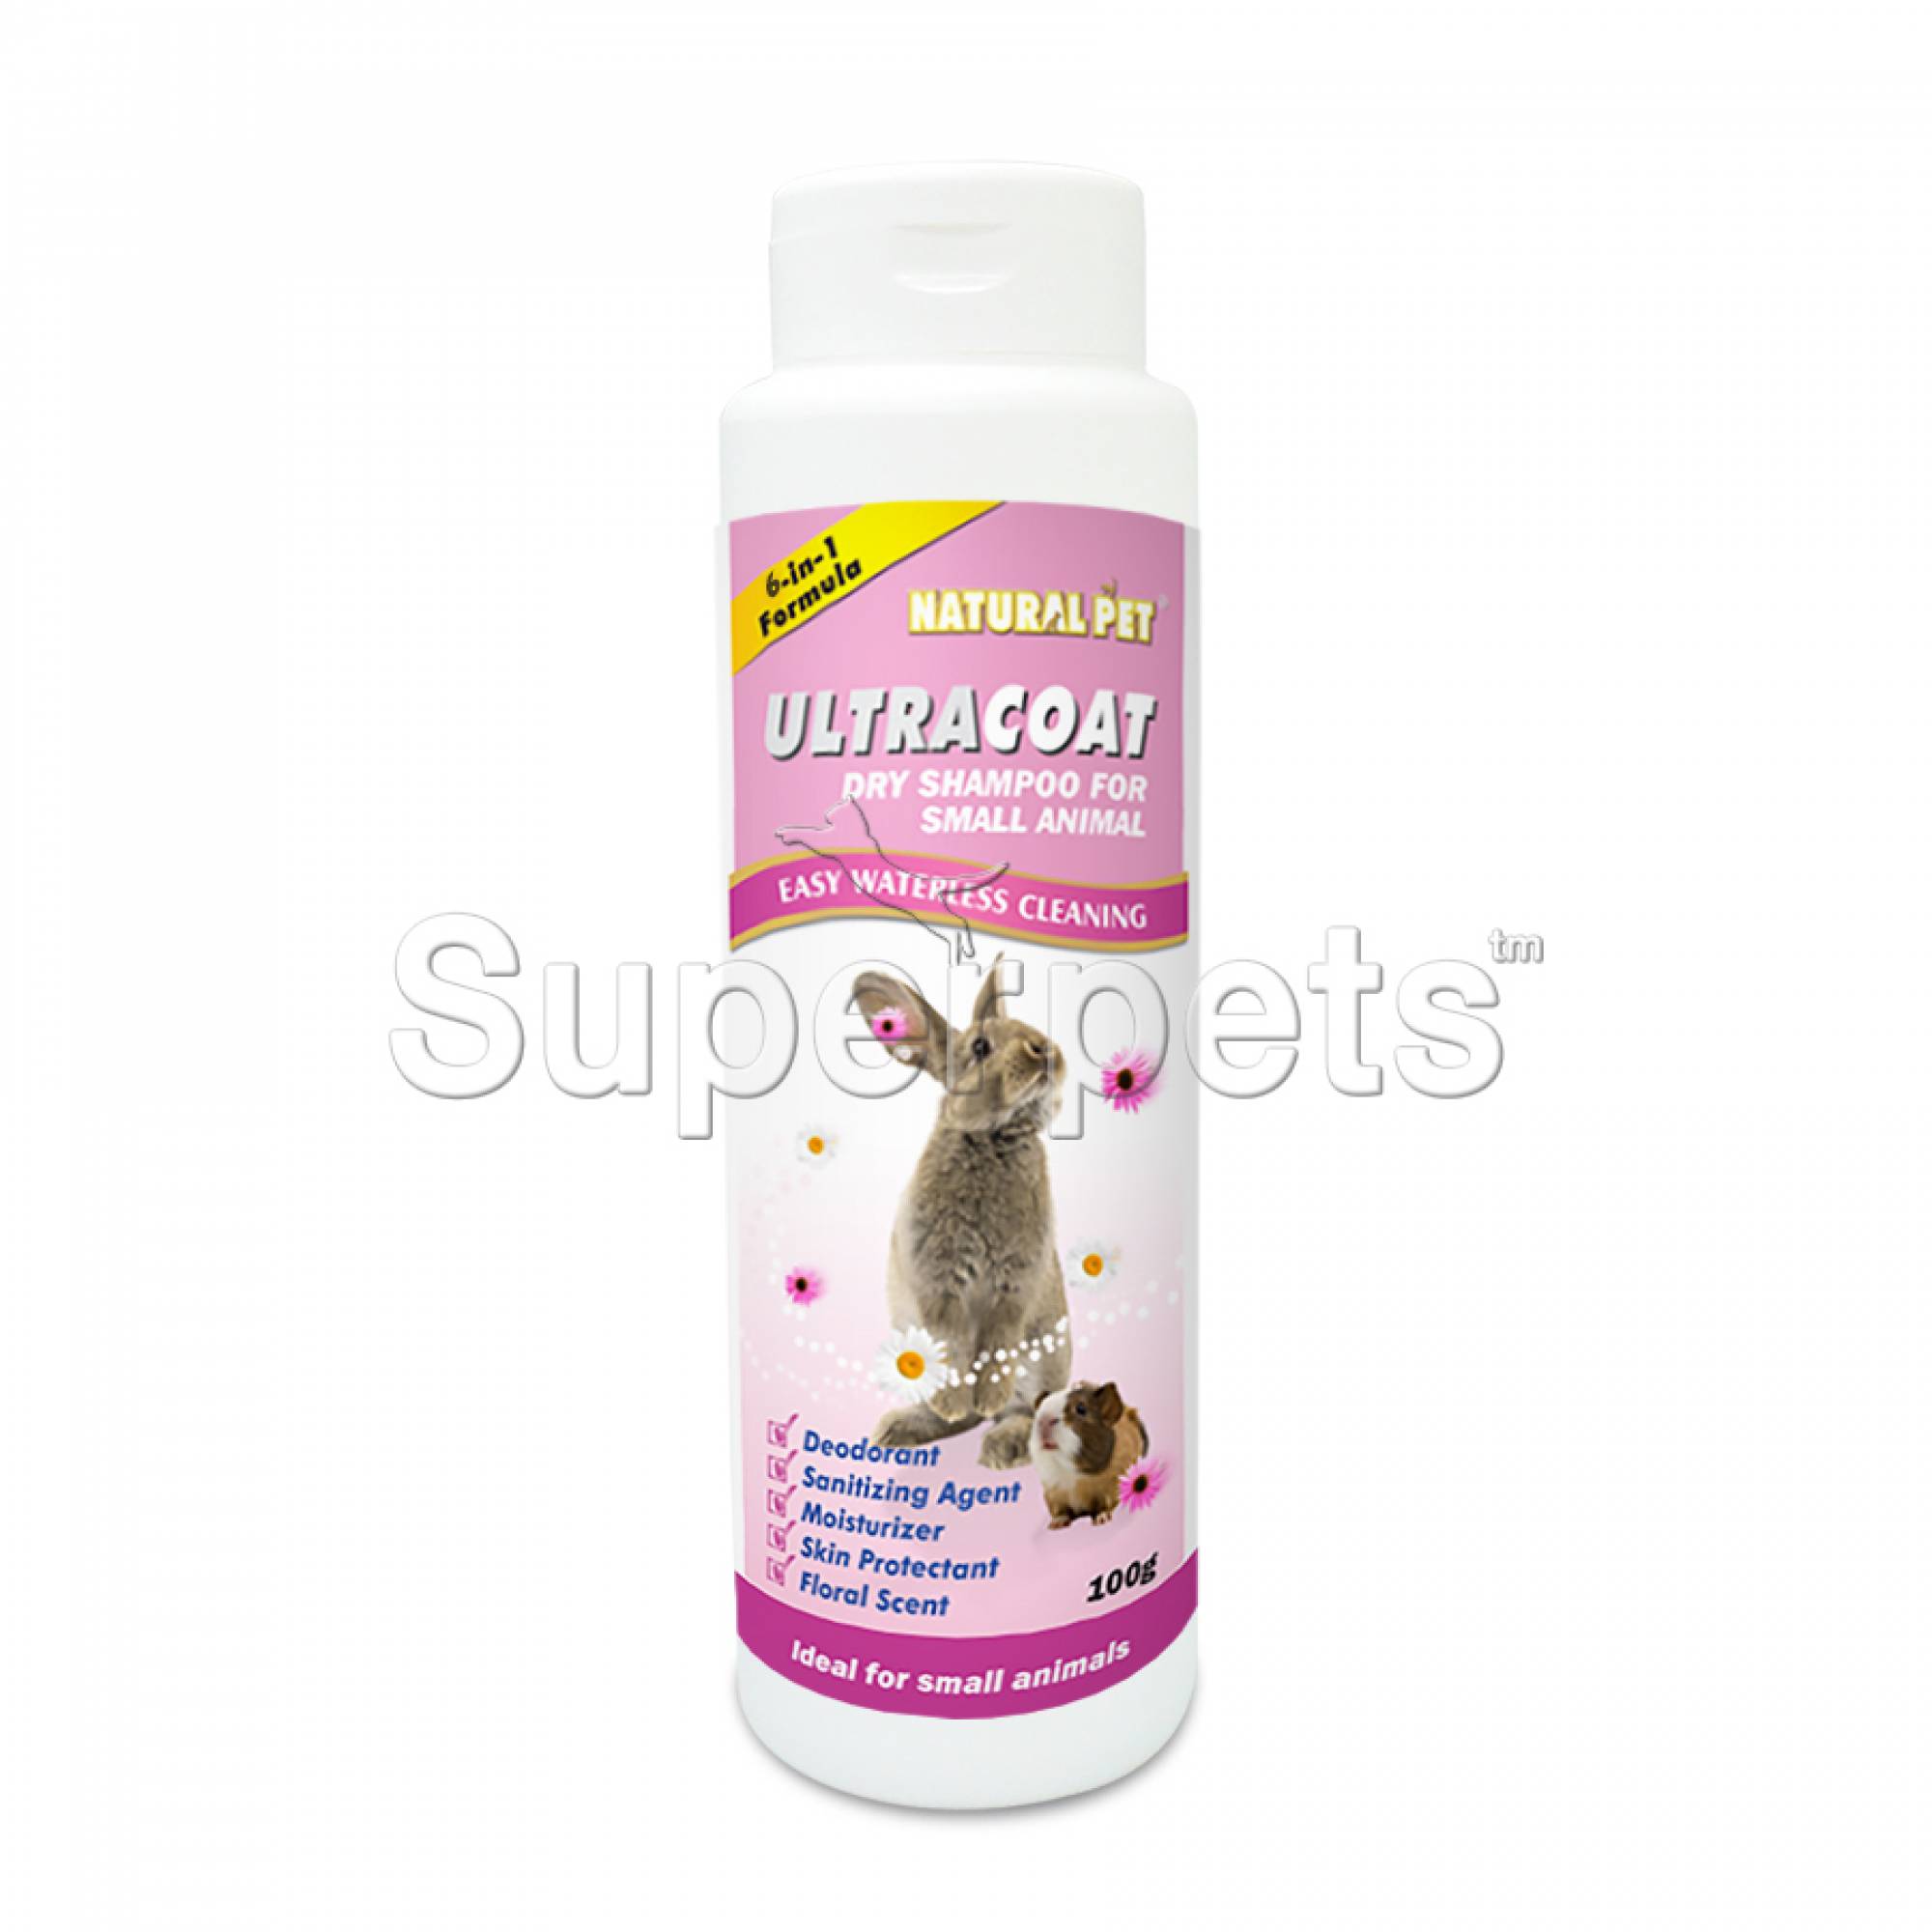 Natural Pet - Ultracoat for Small animal 100g